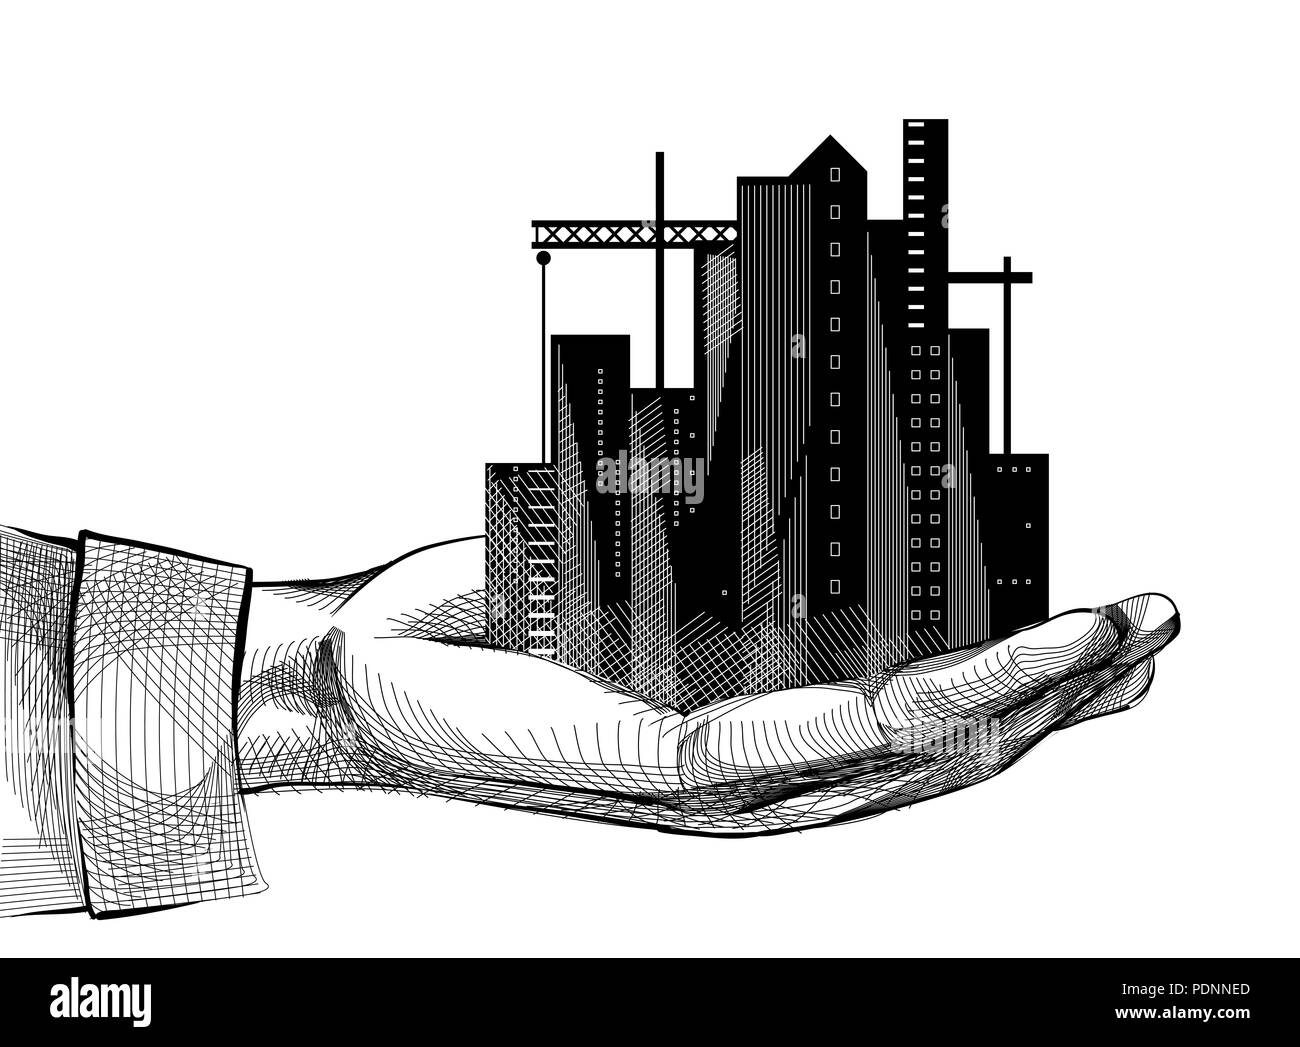 Sketch Illustration of a Hand Holding a City with Tall Buildings and Tower Crane Stock Photo